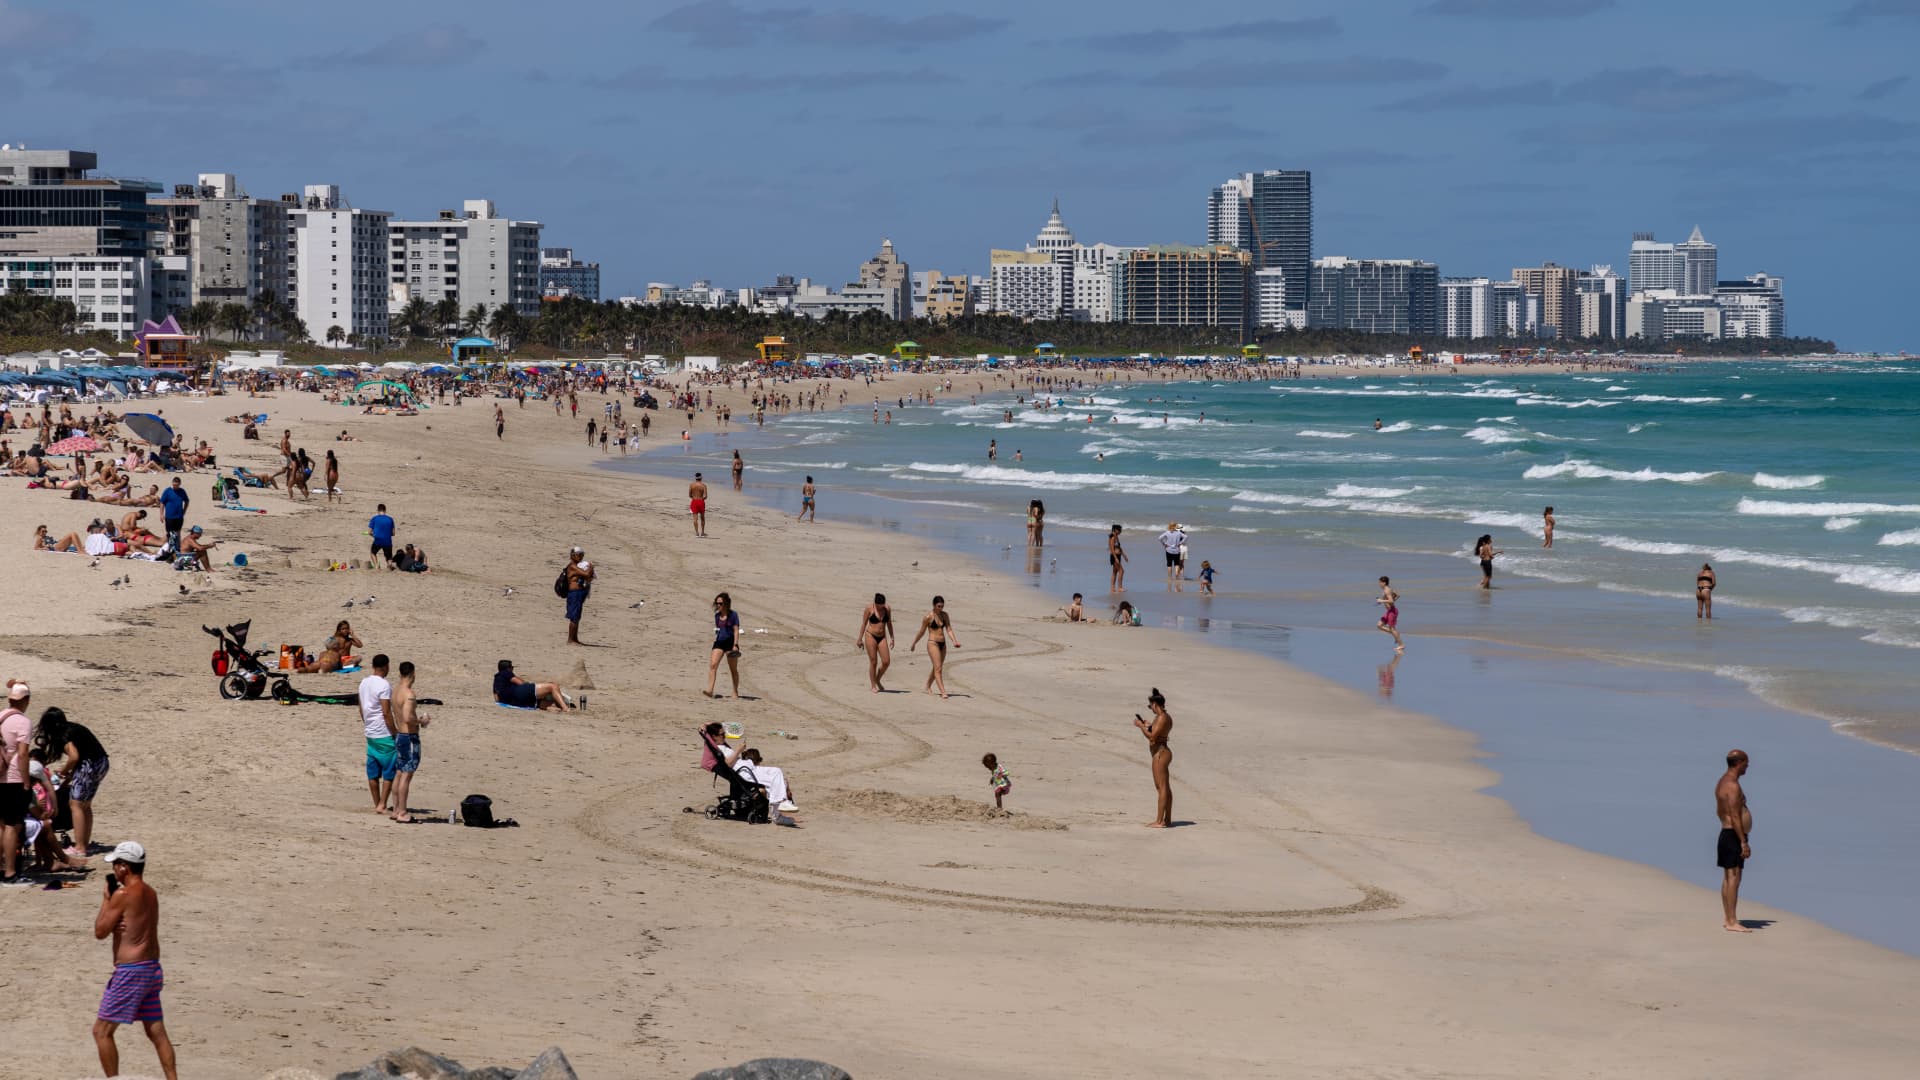 Miami is ‘ground zero’ for climate risk. People move there, build there anyway [Video]